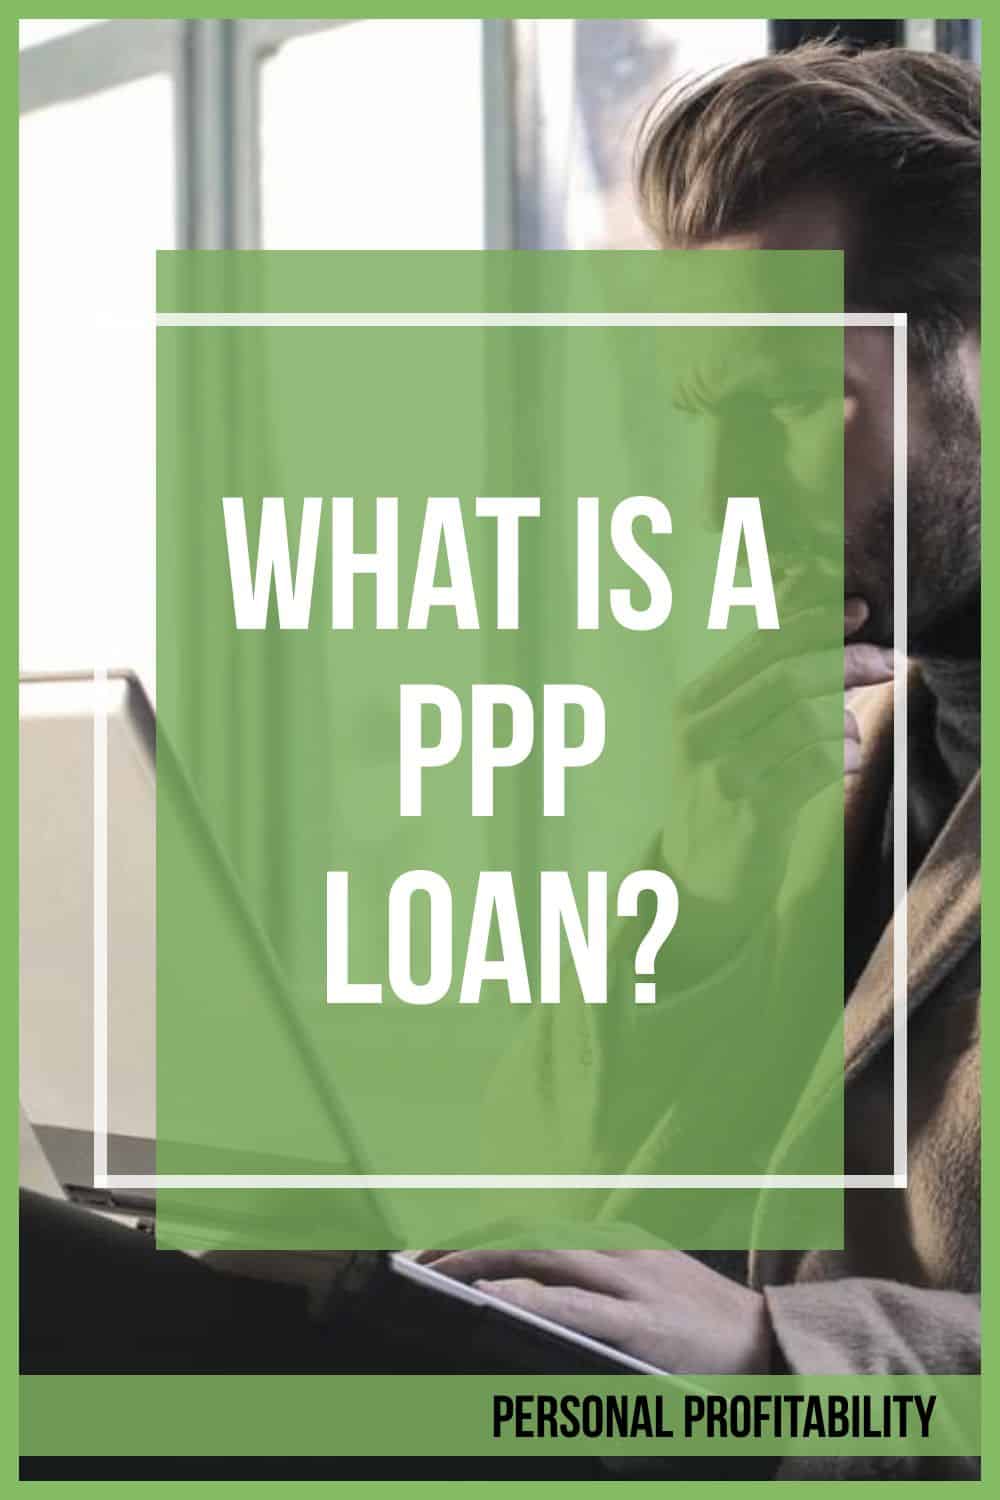 What is a PPP Loan?